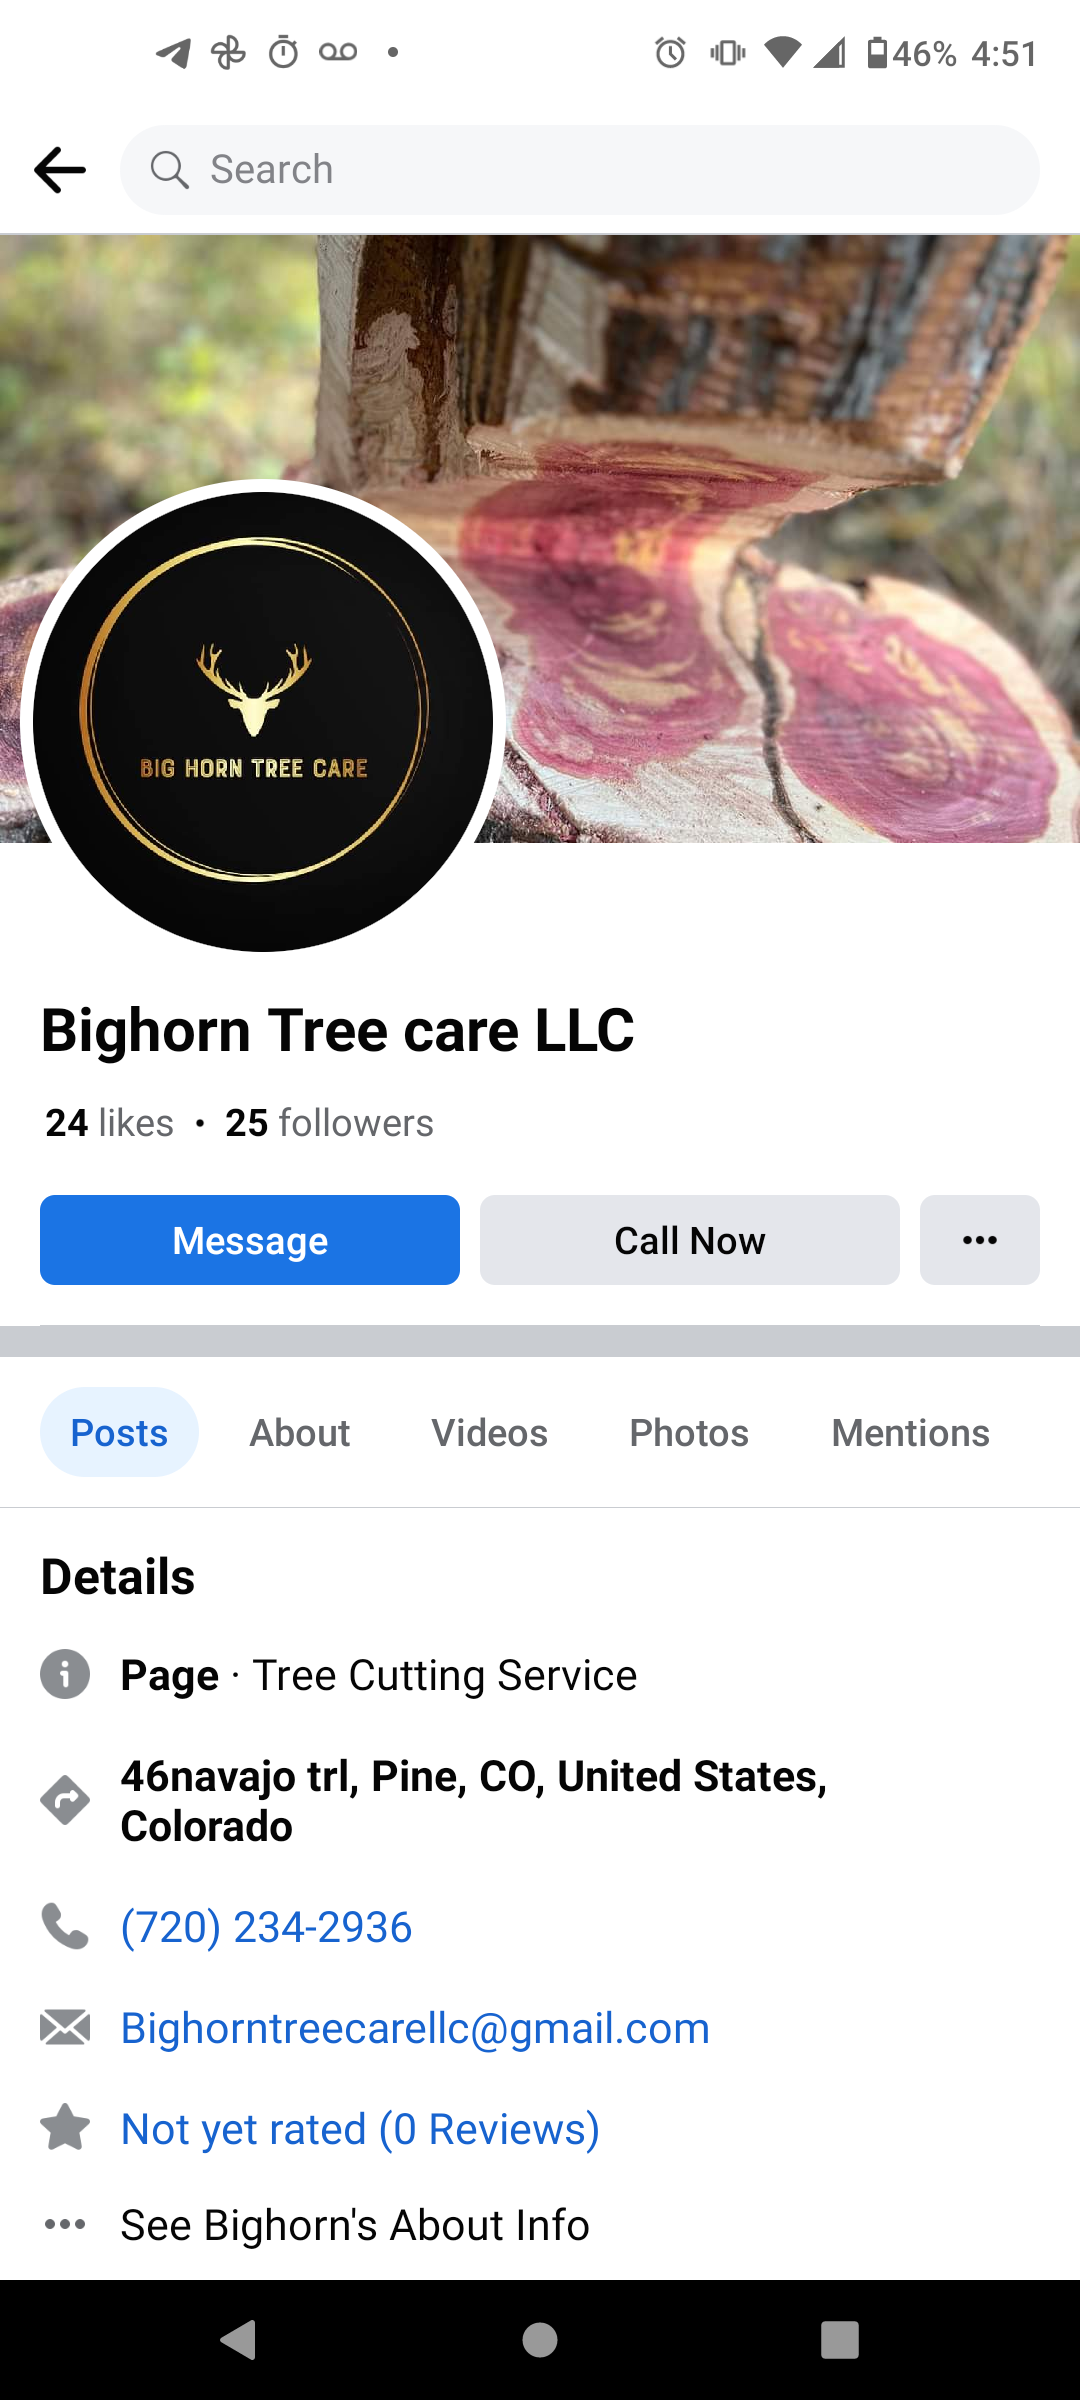 The business Facebook page account 